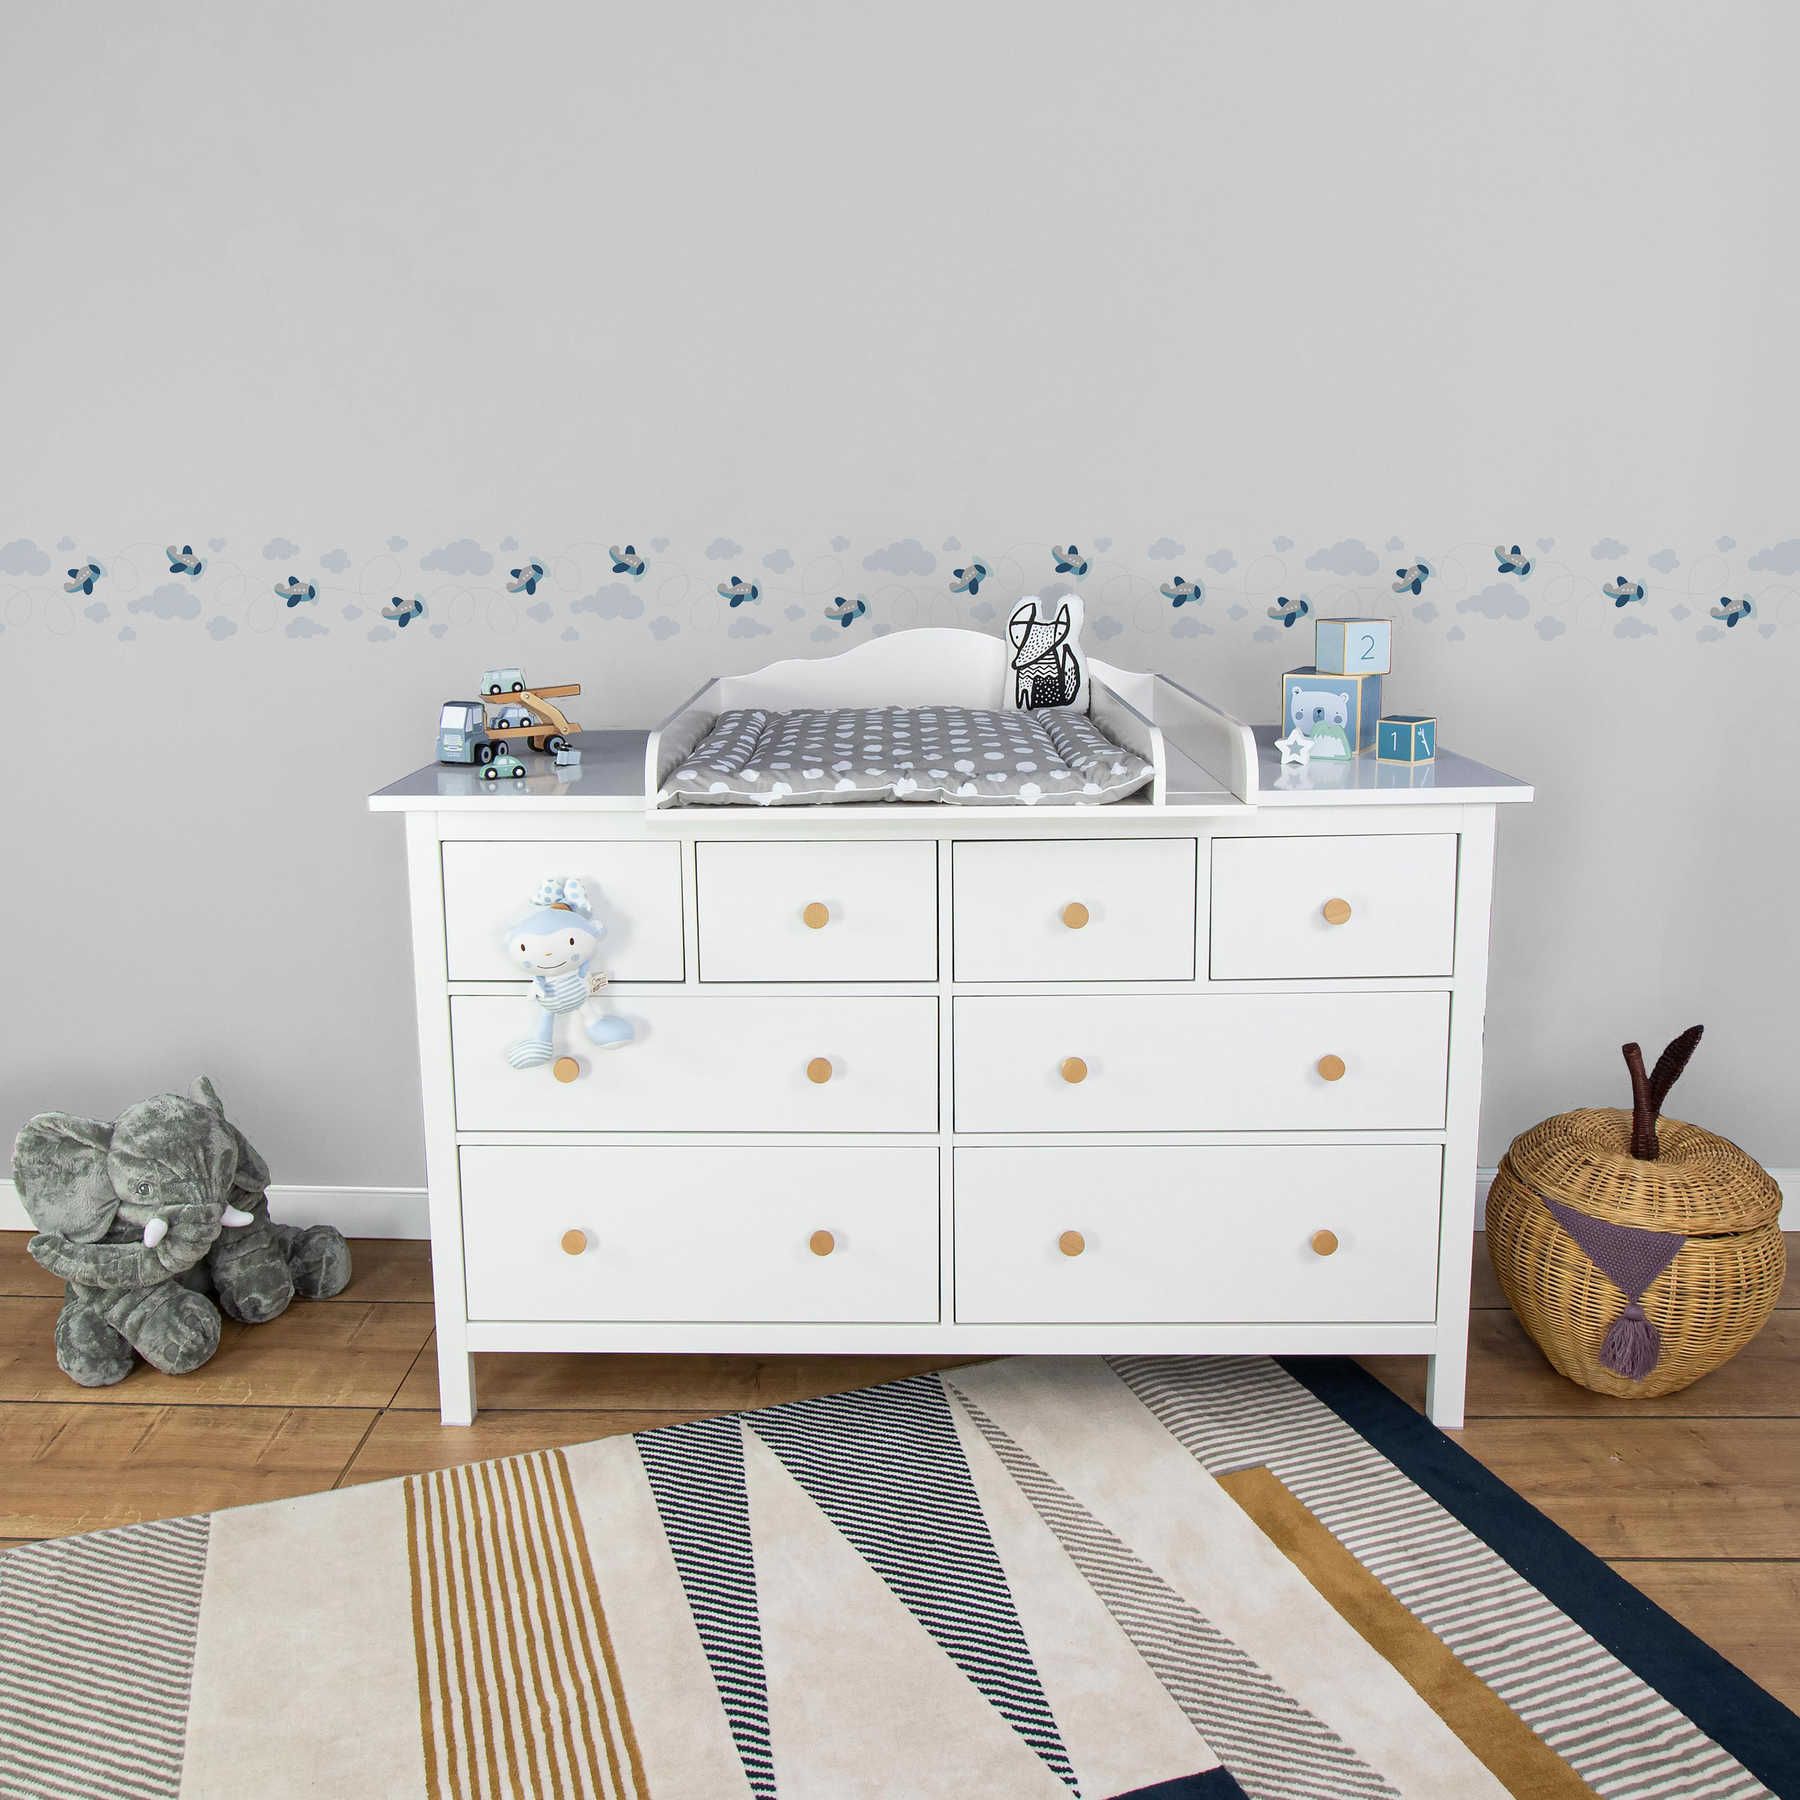             Airy views baby room border for boys - blue, grey, white
        